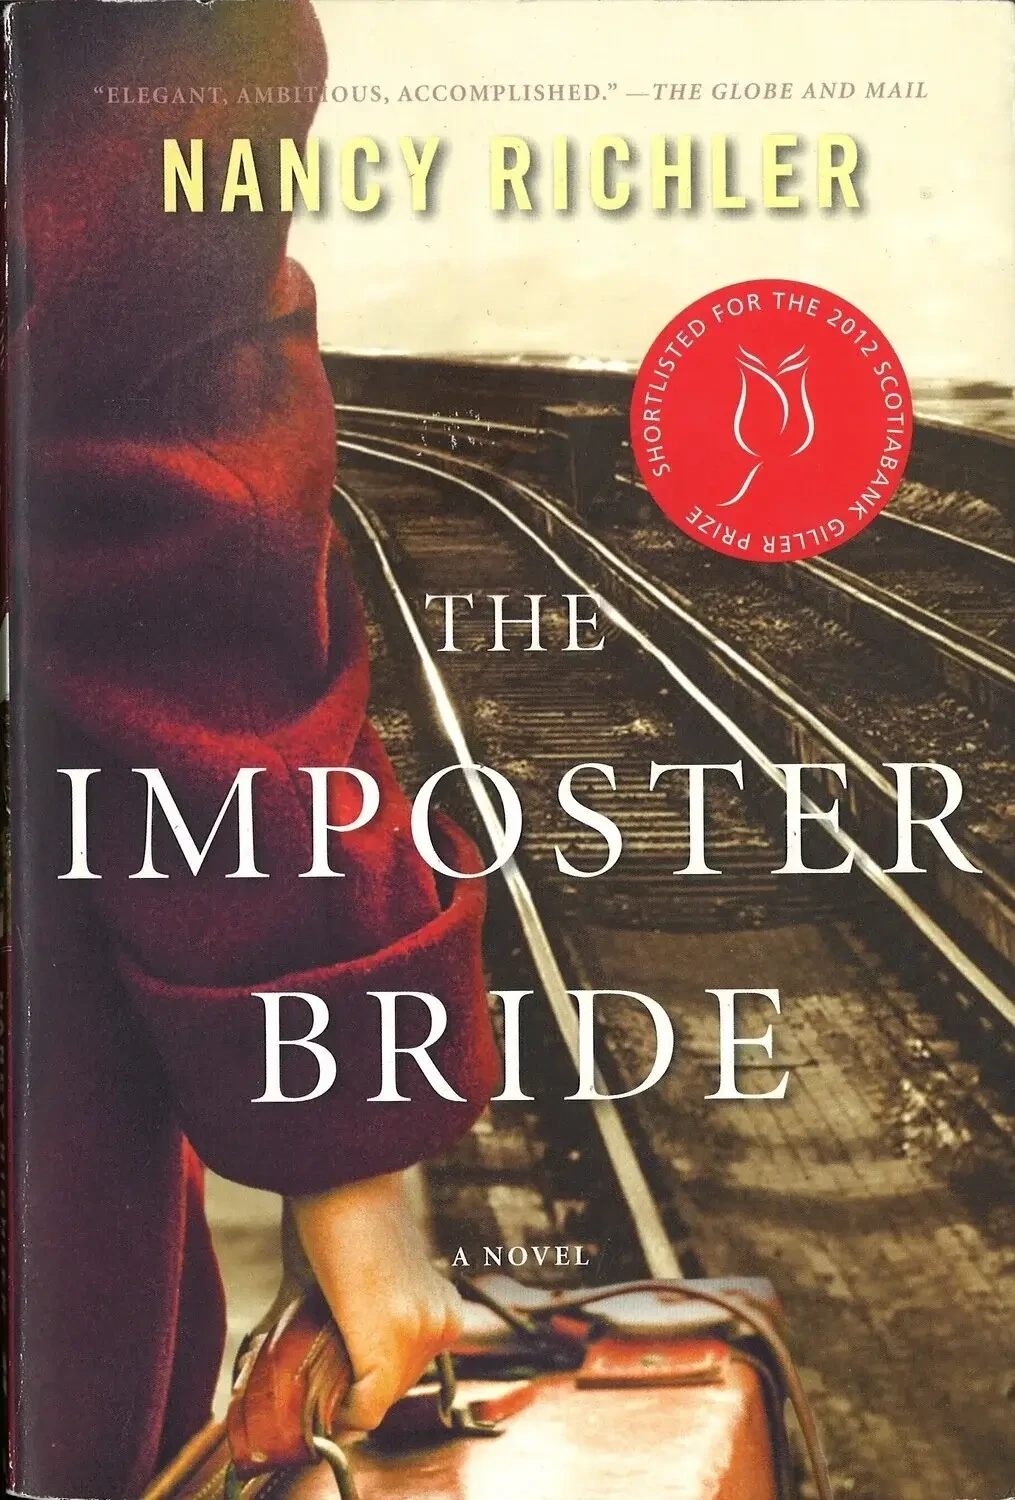 The Imposter Bride by Nancy Richler